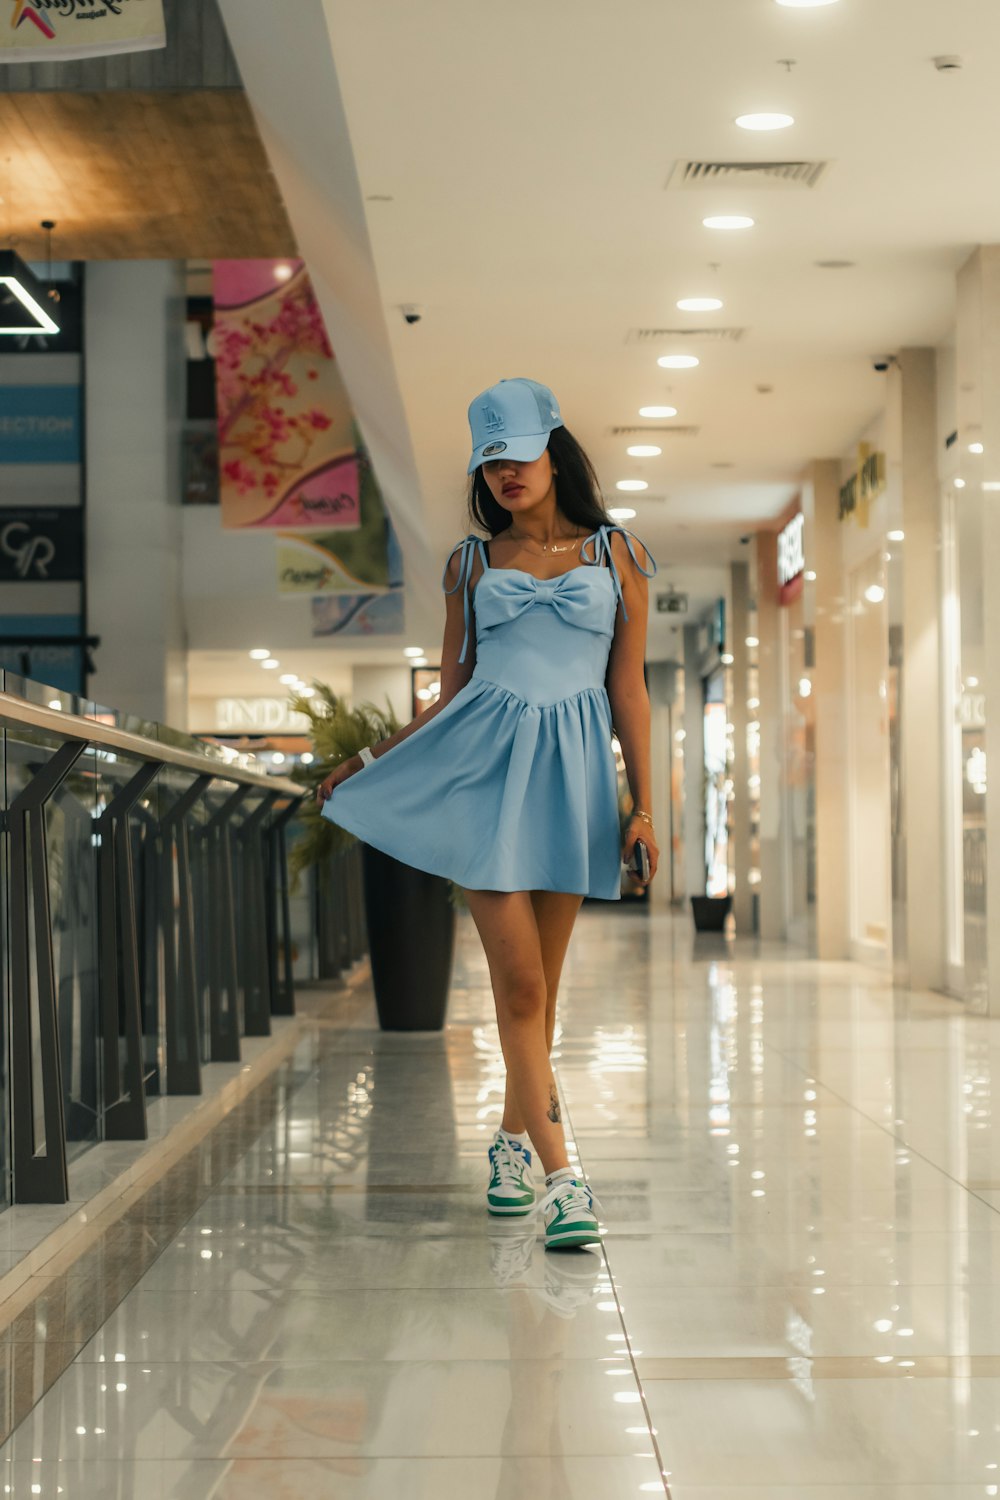 a woman in a blue dress and hat walking down a hallway